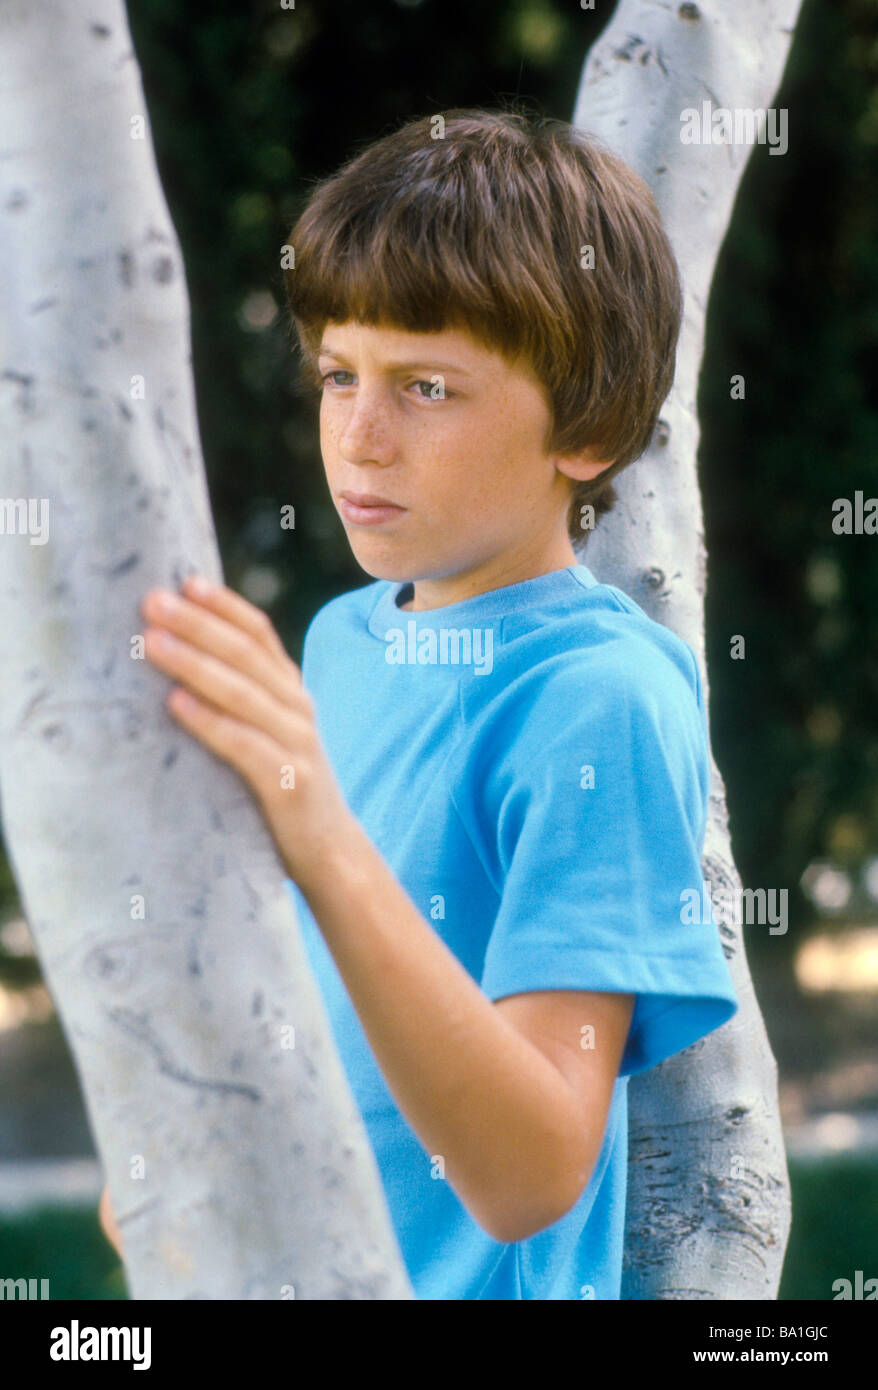 Boy serious expression face look stare direct portrait tree Stock Photo